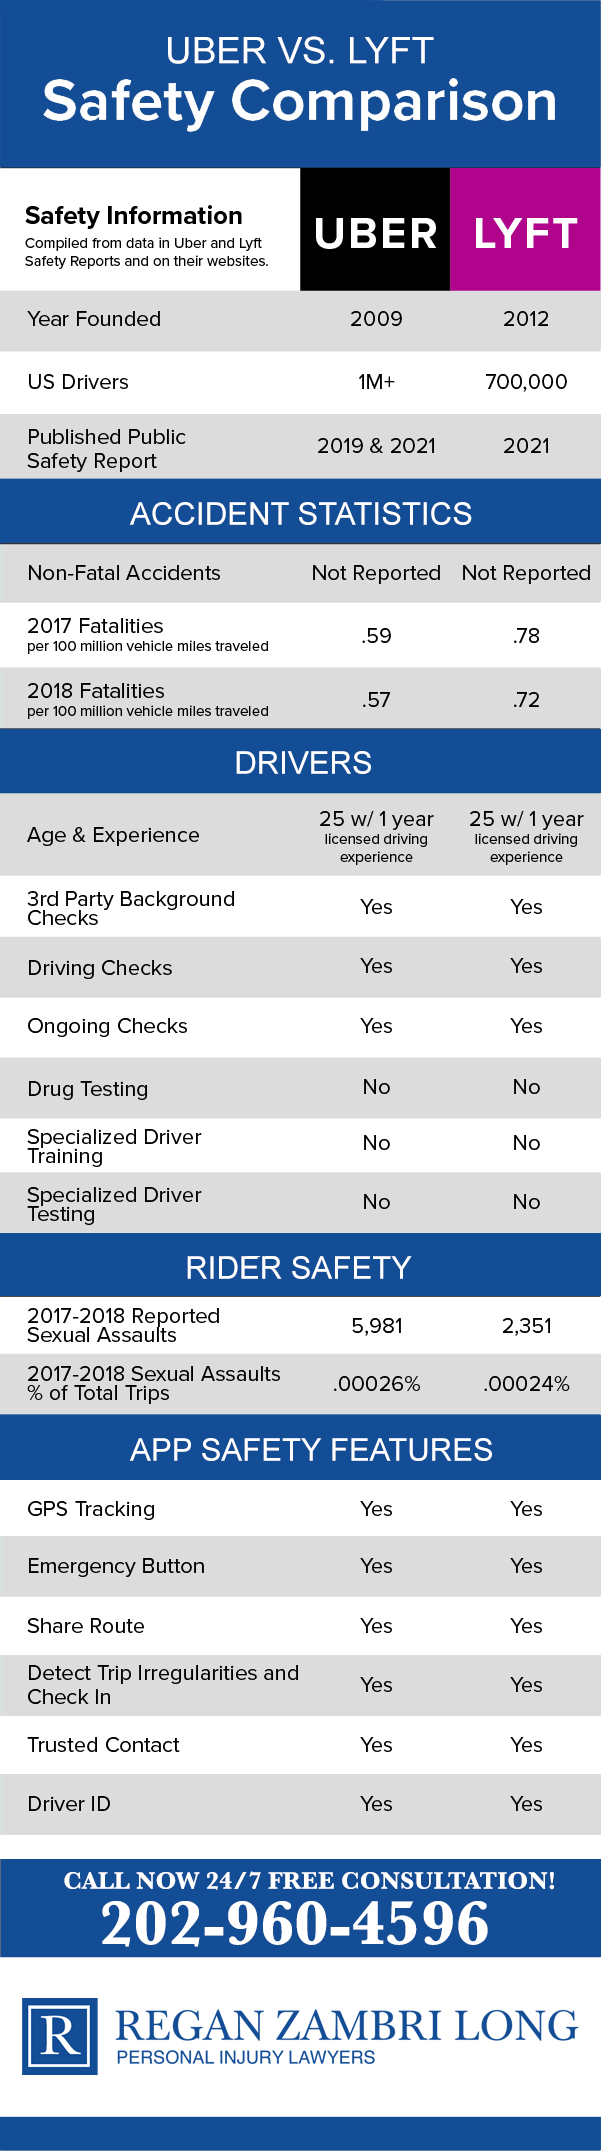 Uber and Lyft Safety Comparison Infographic